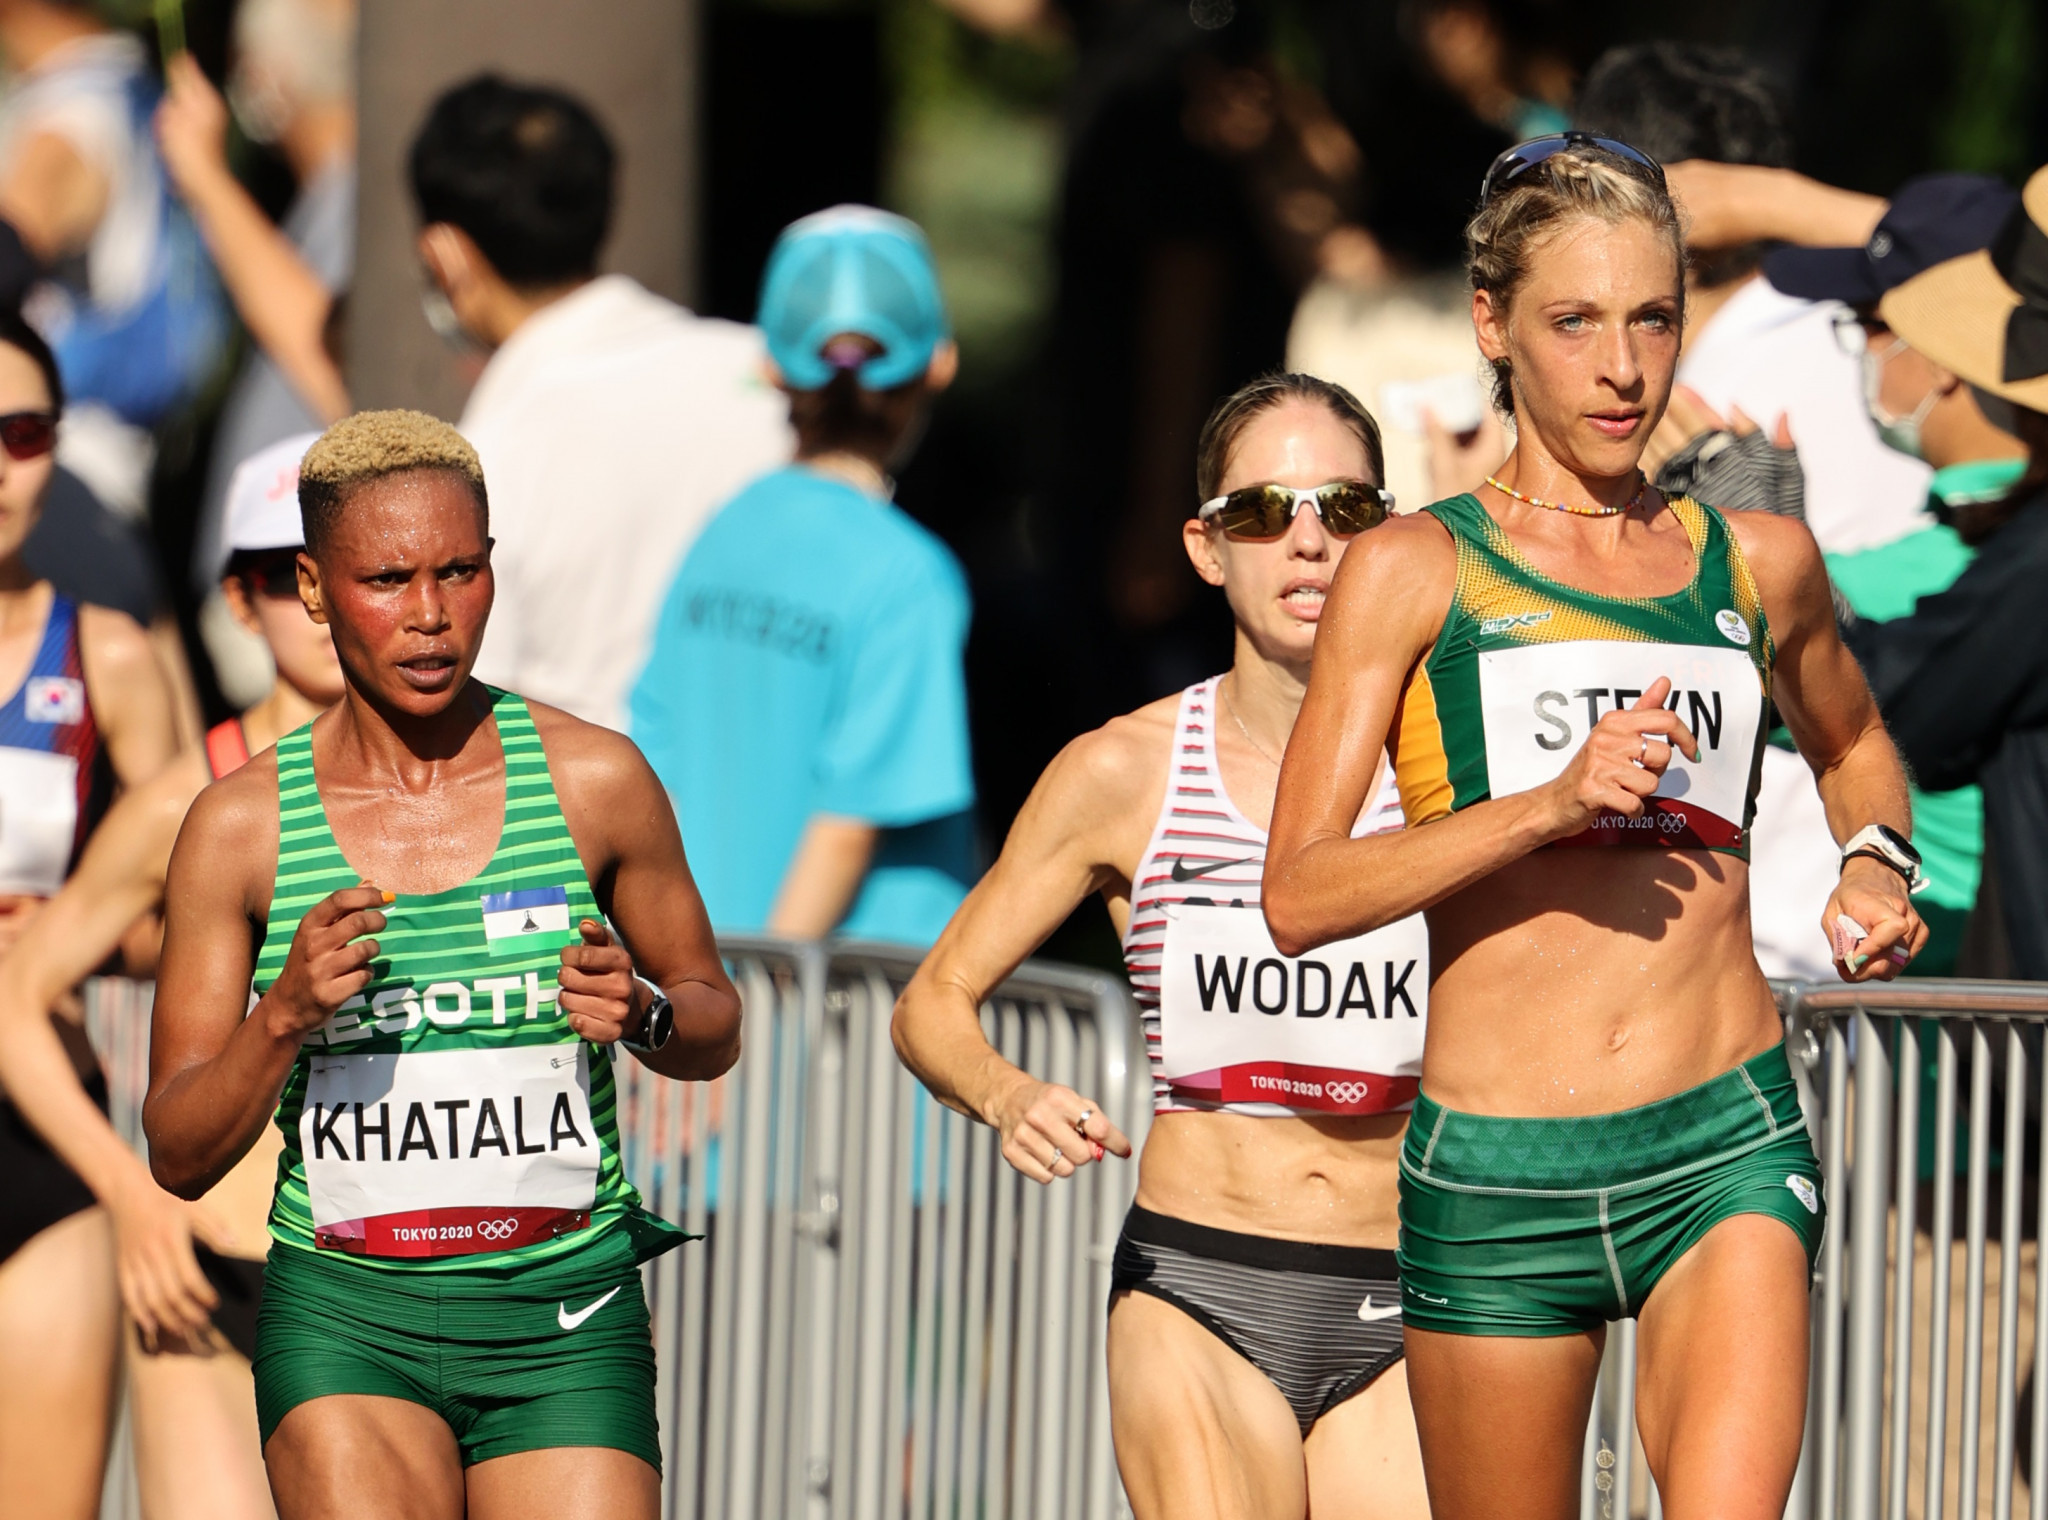 Netang Khatala, left, finished 20th in the marathon at Tokyo 2020 ©Getty Images